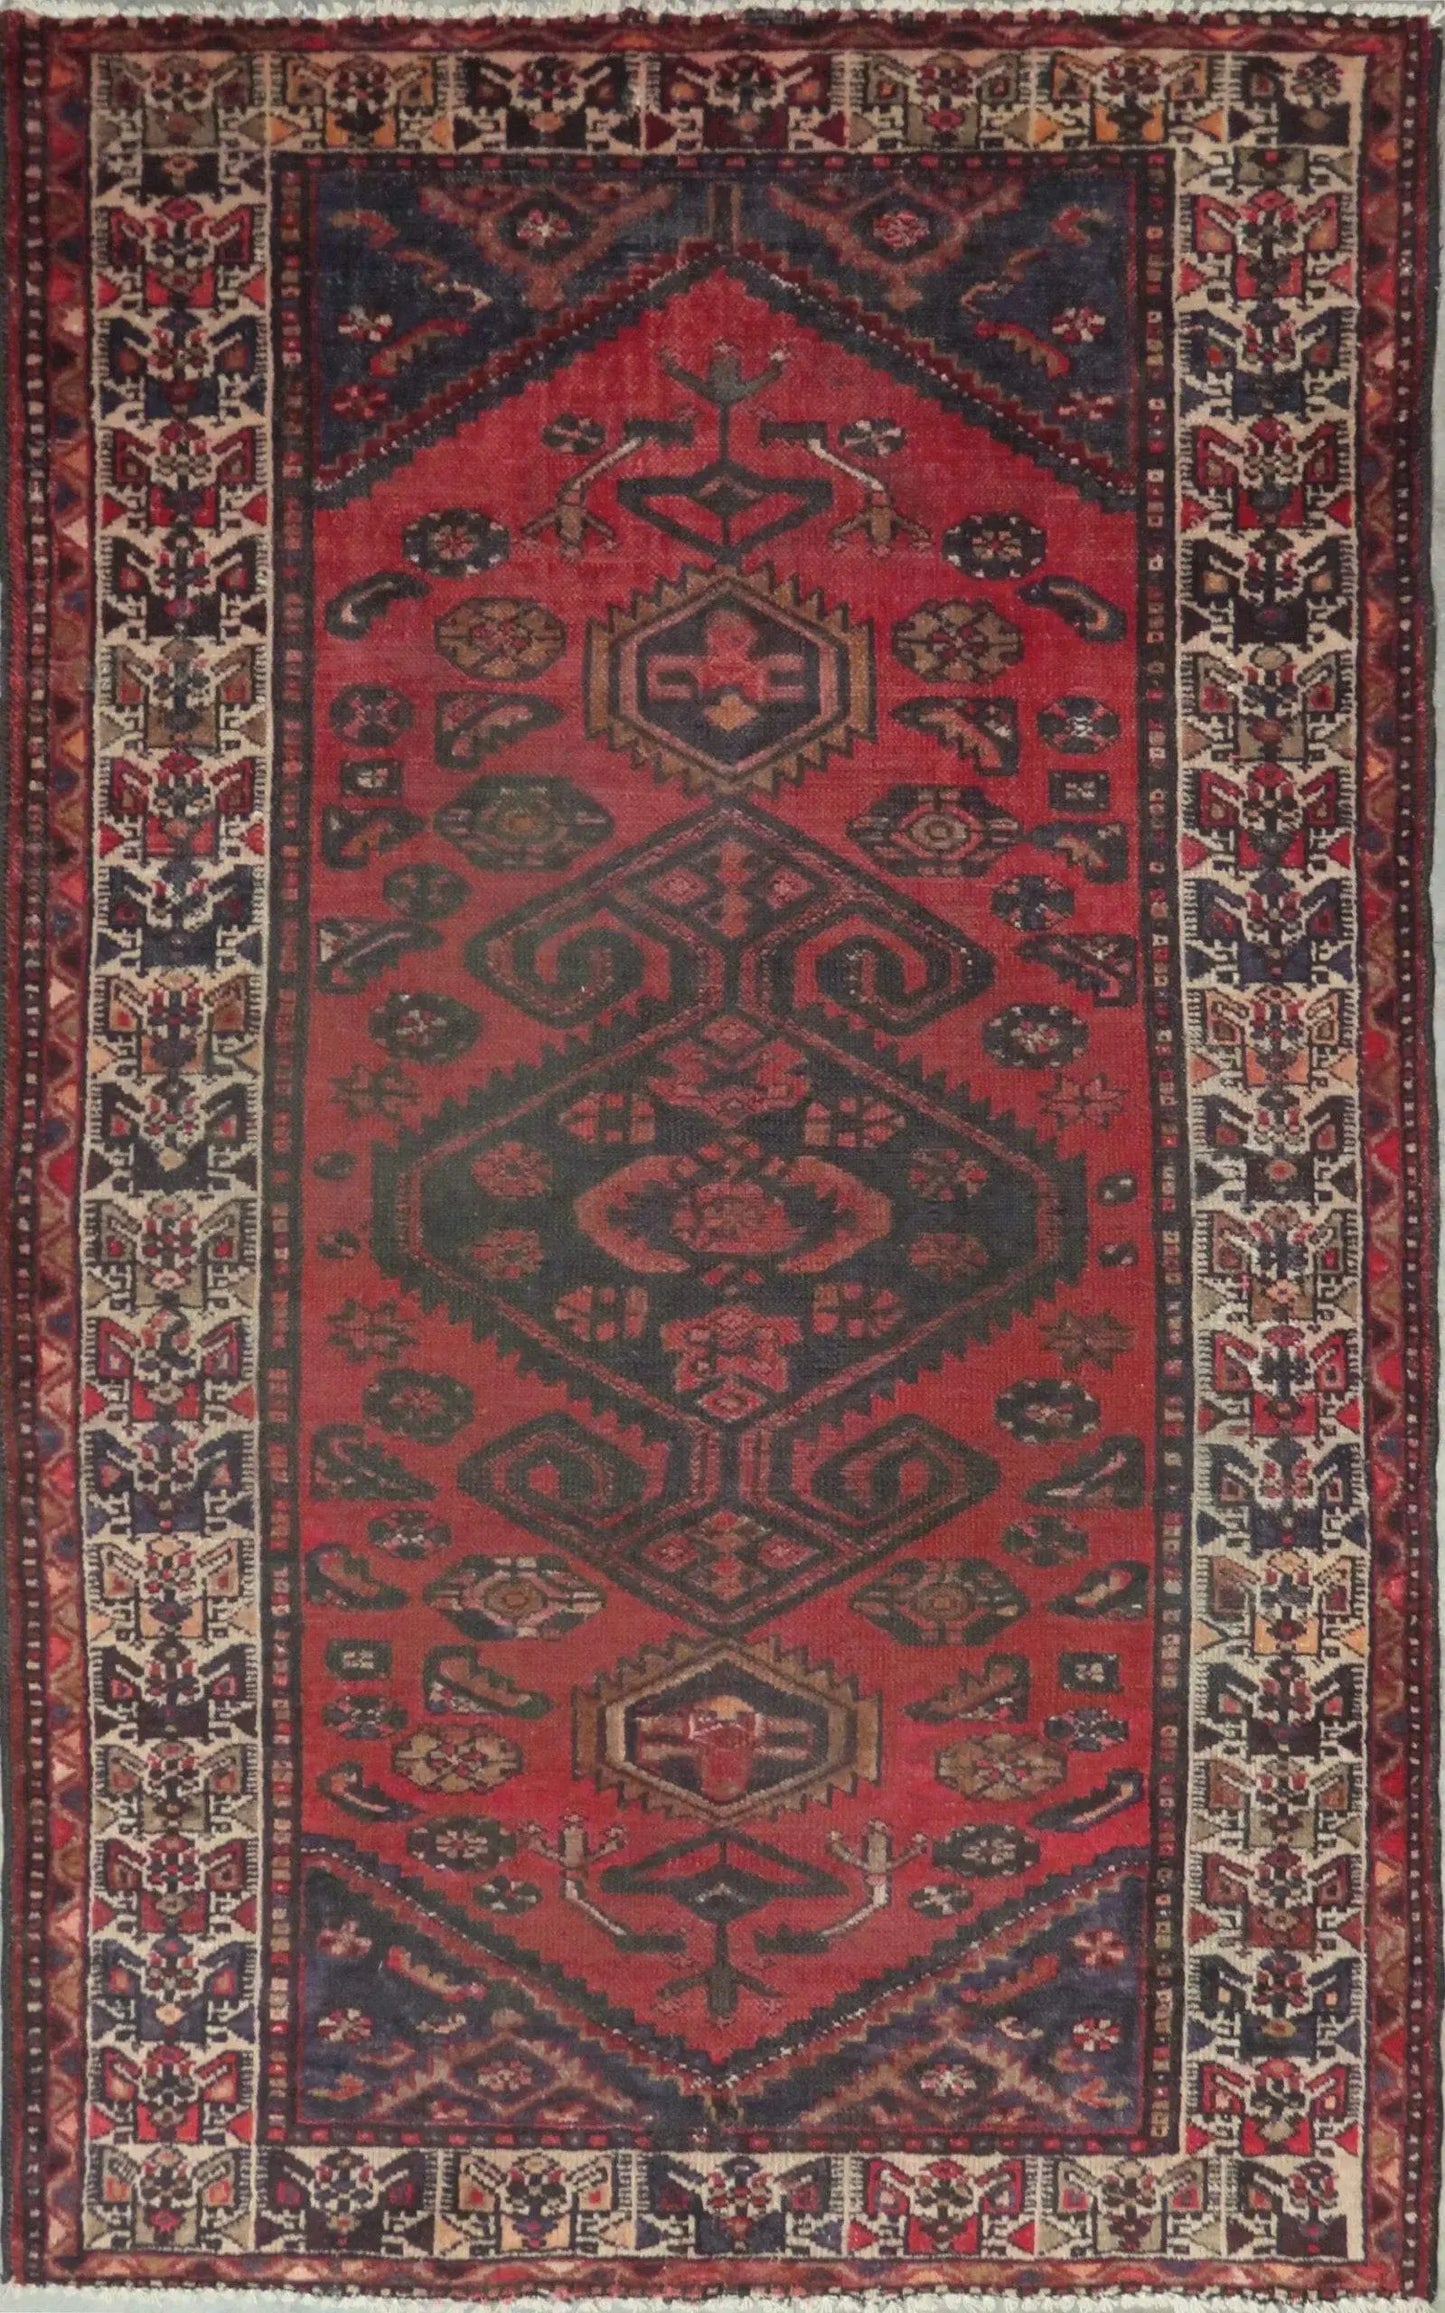 Hand-Knotted Persian Wool Rug _ Luxurious Vintage Design, 6'8" x 3'1", Artisan Crafted